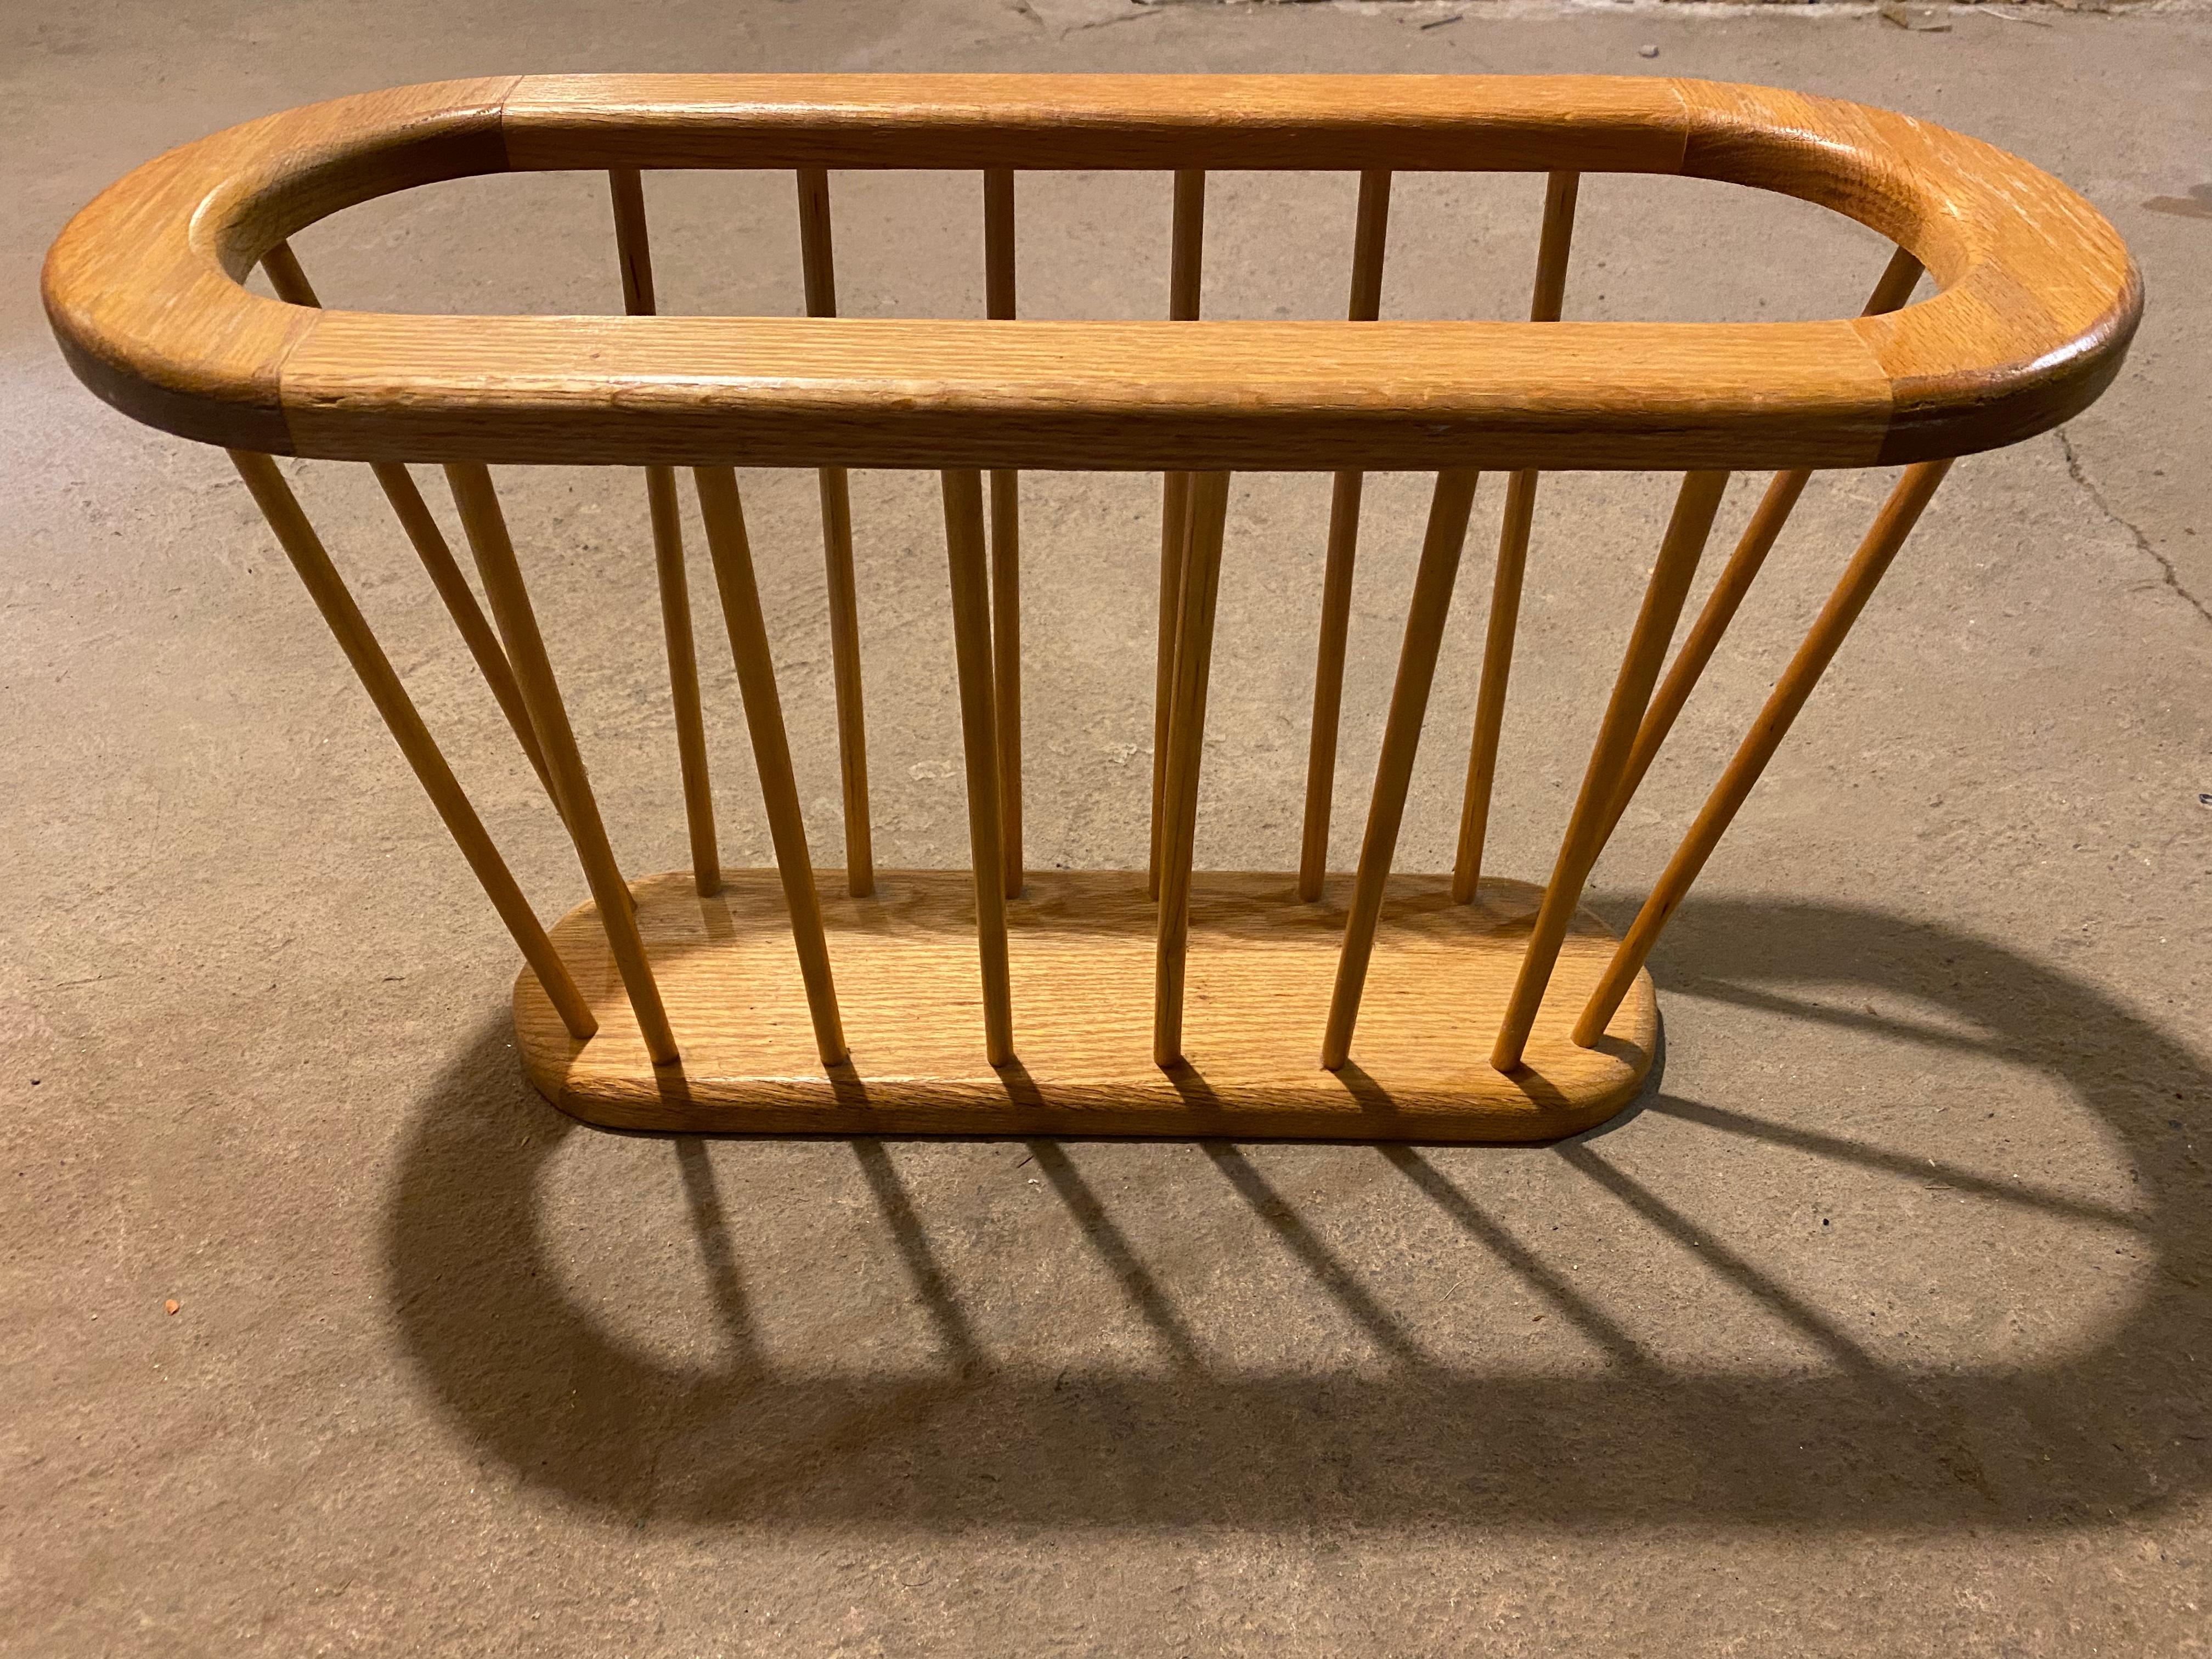 Mid-Century Modern Blonde magazine rack. Oval shape with spindles in mid-century style.